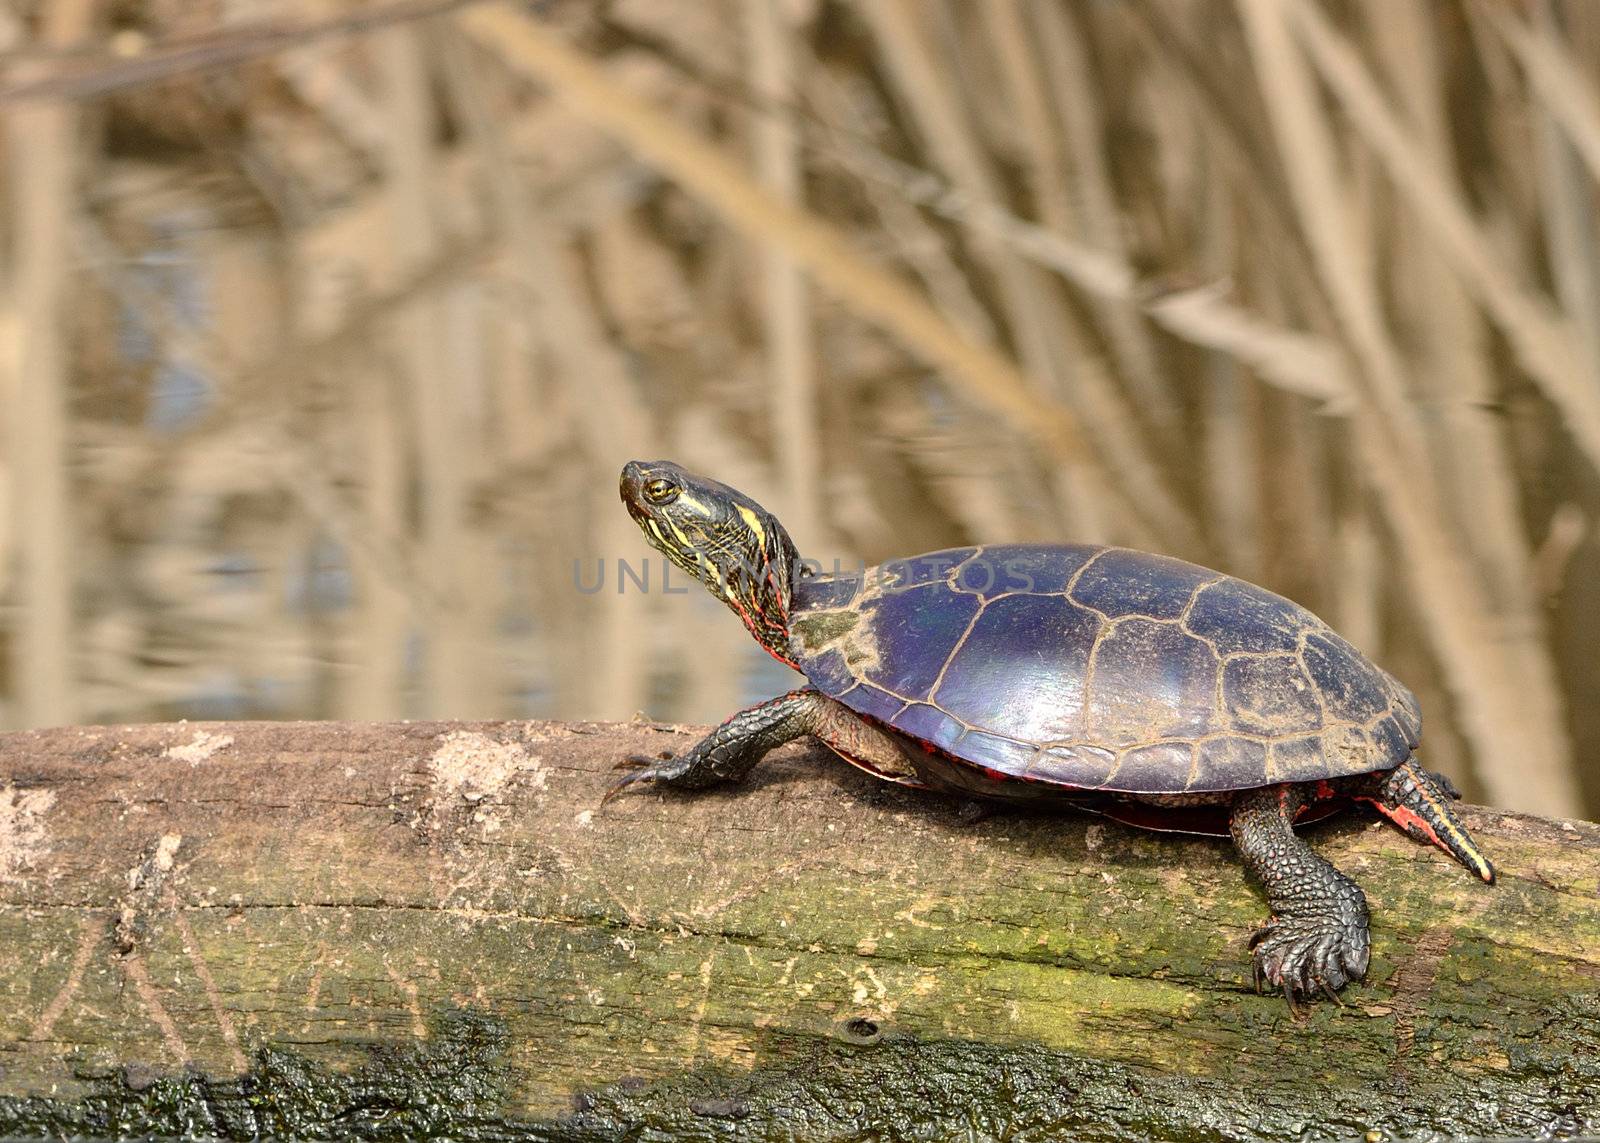 A painted turtle perched on a log in a marsh.